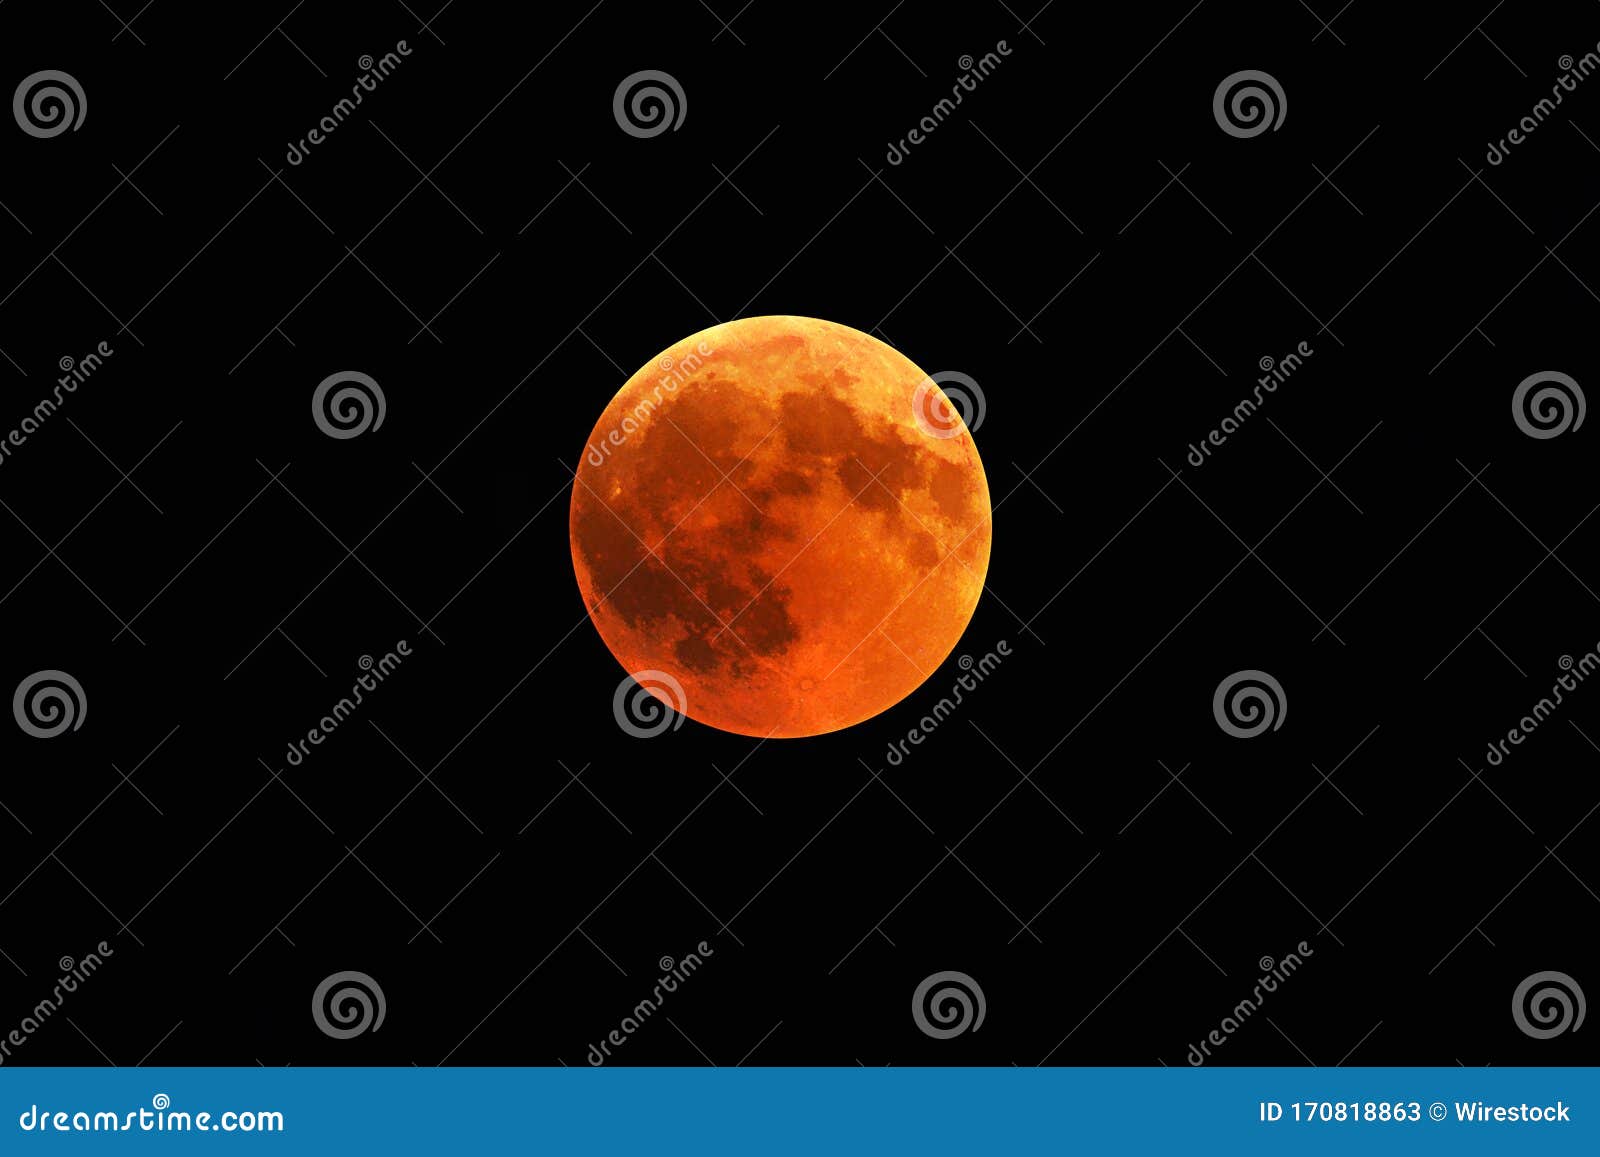 beautiful shot of a red moon, total lunar eclipse with a black night sky in the background